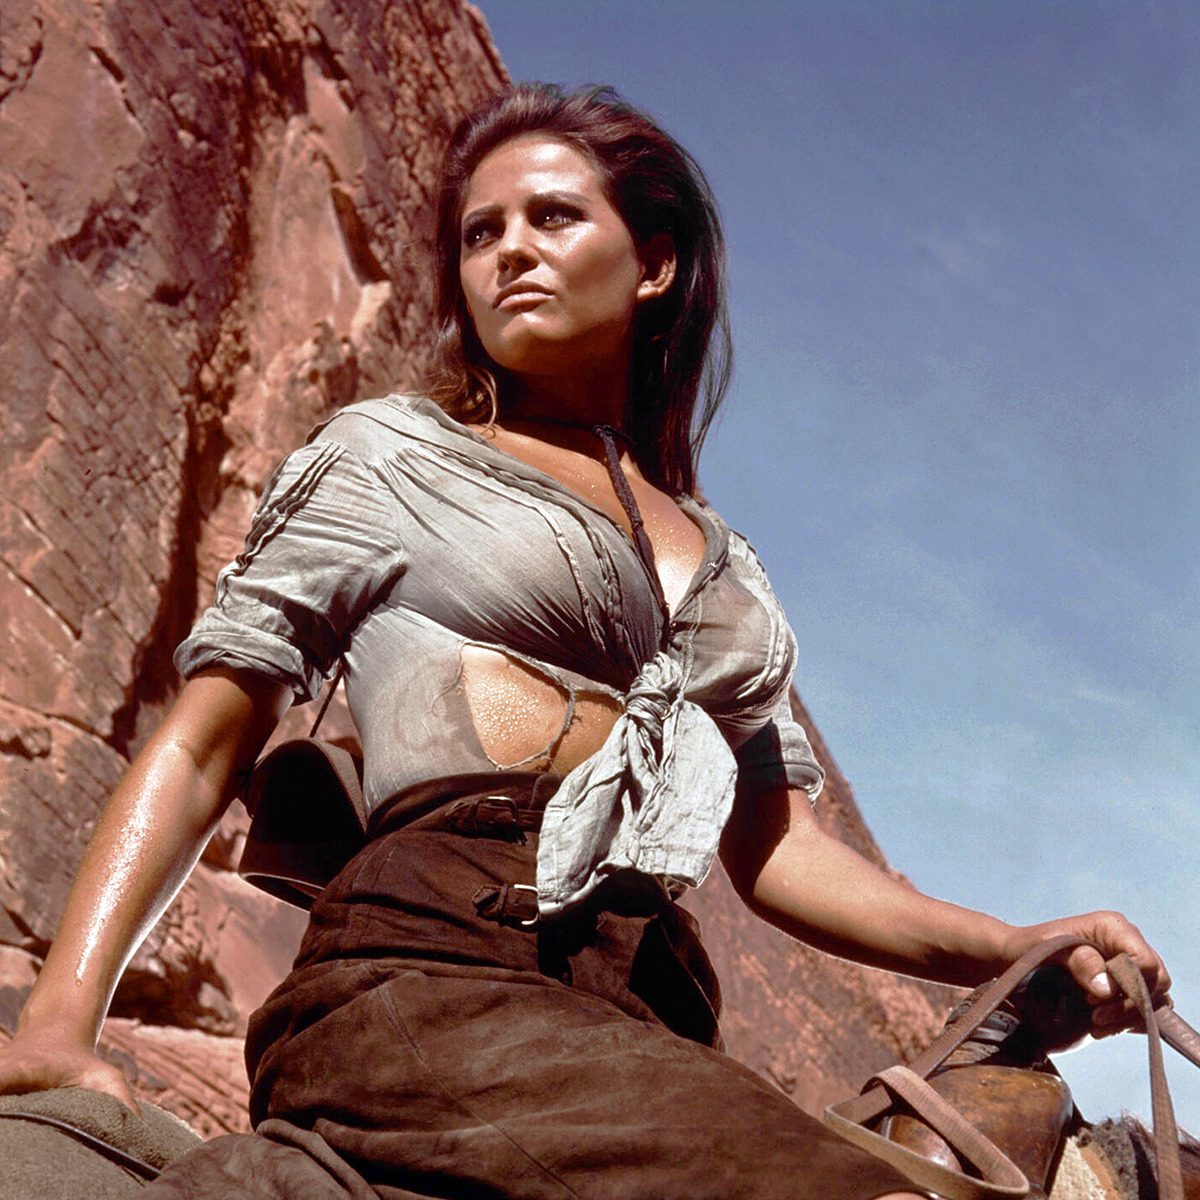 Claudia Cardinale : production still from Richard Brooks’s The Professionals (1966)